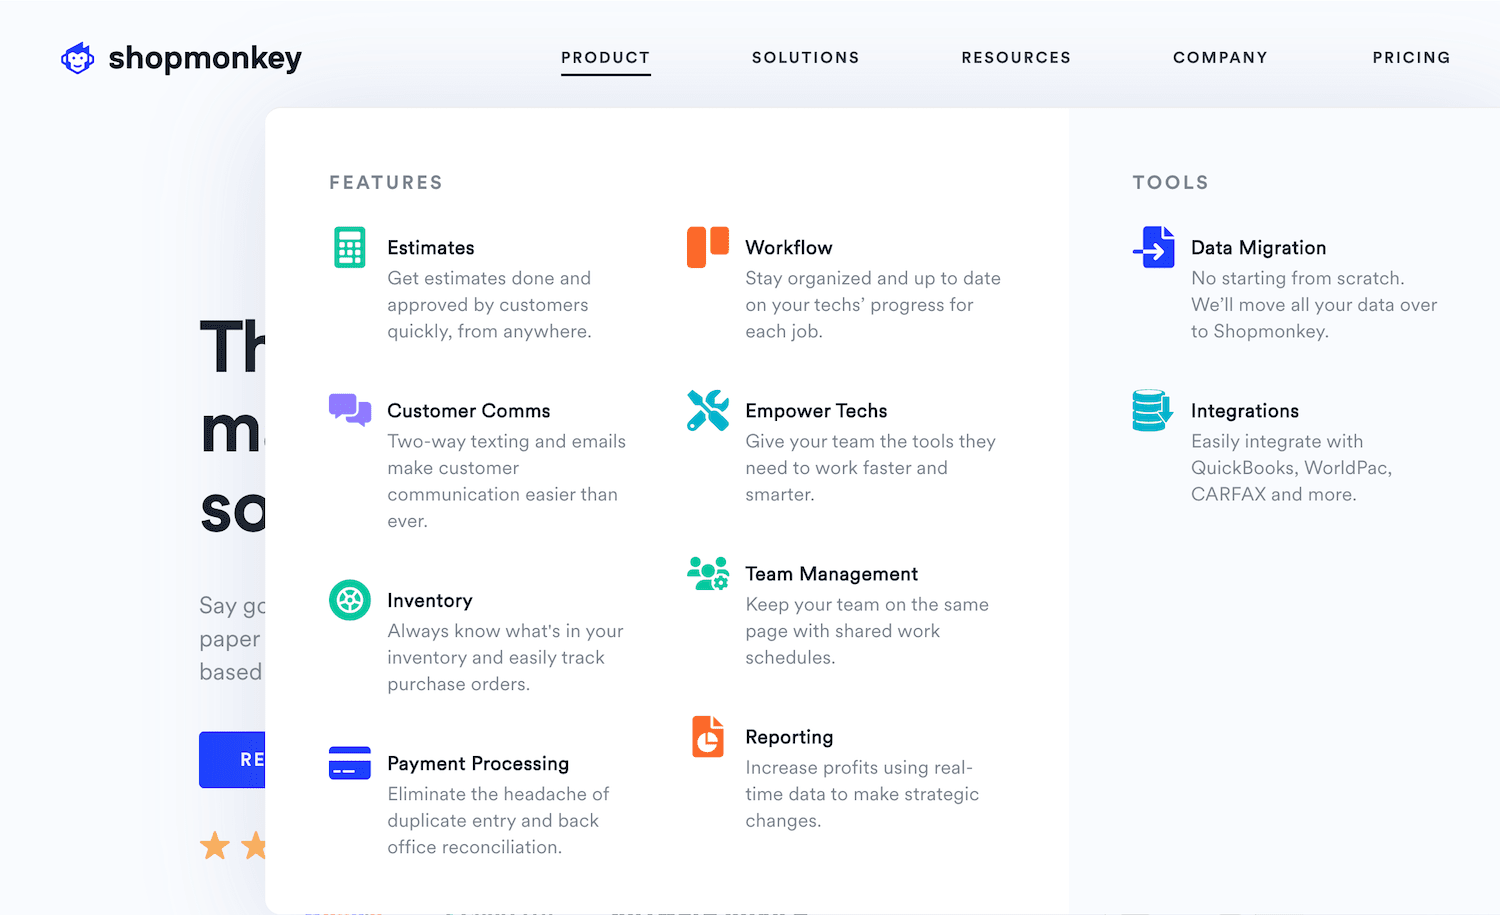 Shopmonkey's Website Uses a Mega Menu Design to Highlight's Their SaaS Product Features